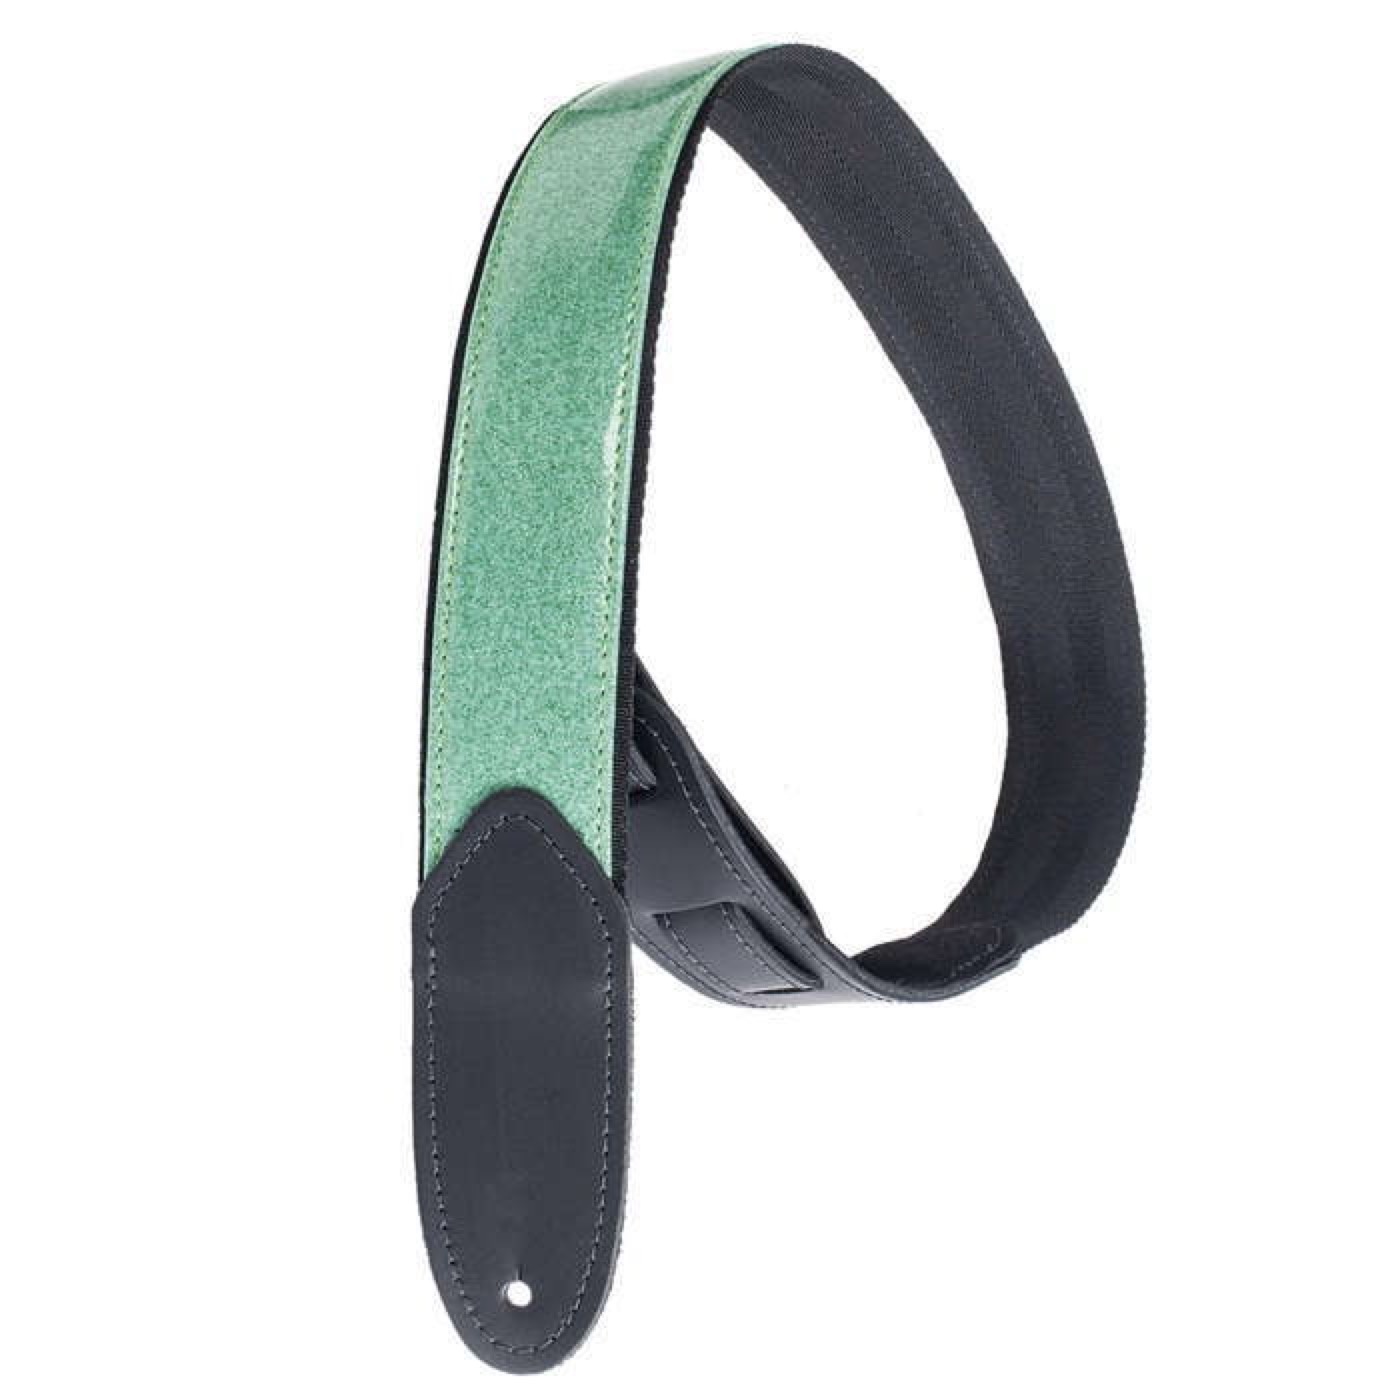 Henry Heller Guitar Strap - 2" Turquoise Sparkle Vinyl with Leather Ends - retro/surf/glam style!